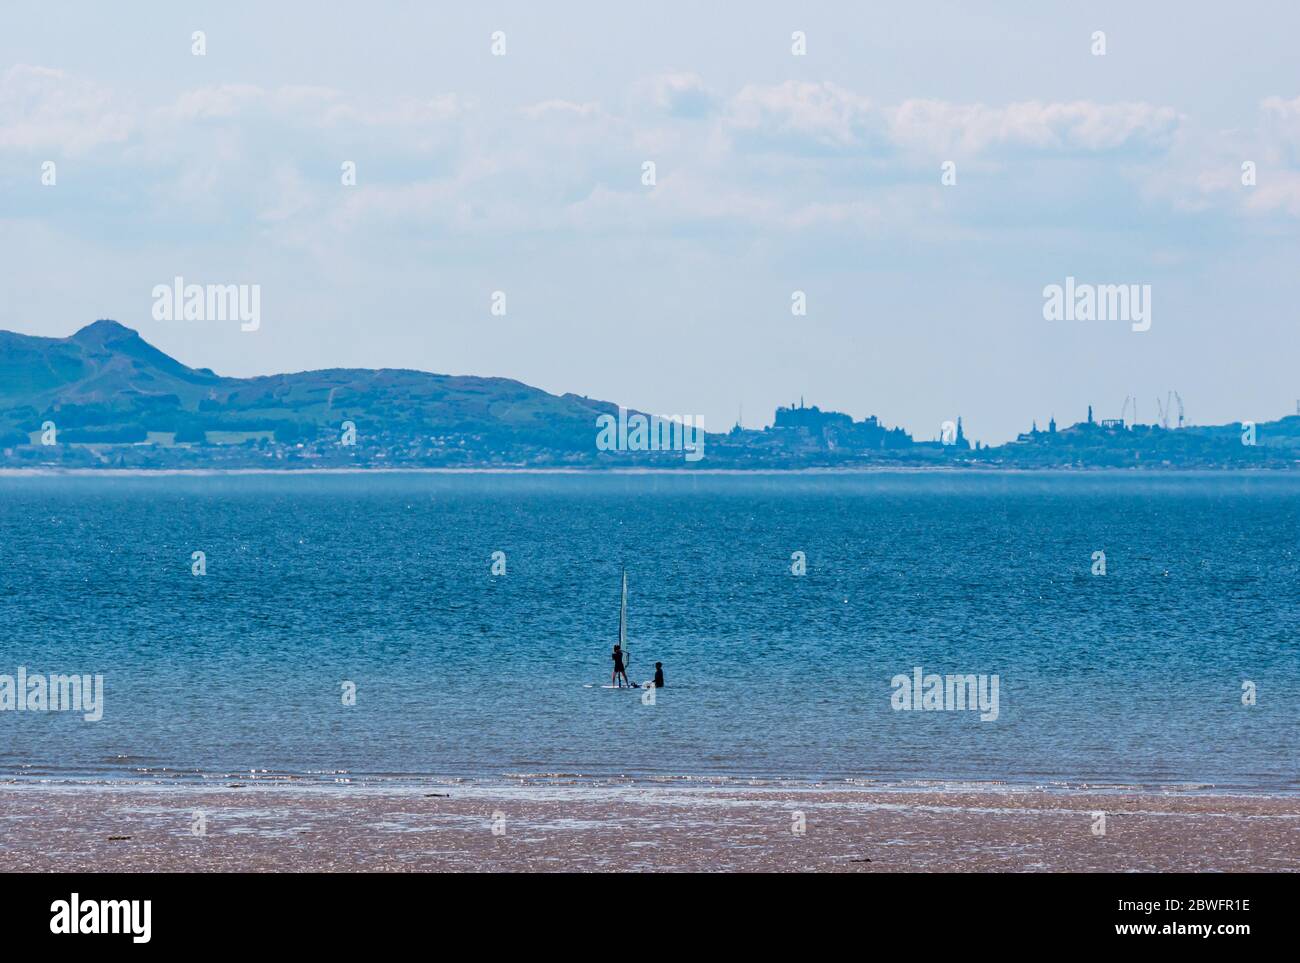 Longniddry Bents, East Lothian, Scotland, United Kingdom, 1st June 2020. UK Weather: hot sunshine at the beach brings people out during the Covid-19 pandemic lockdown. The hazy distinctive outline of Edinburgh is in the distance Stock Photo